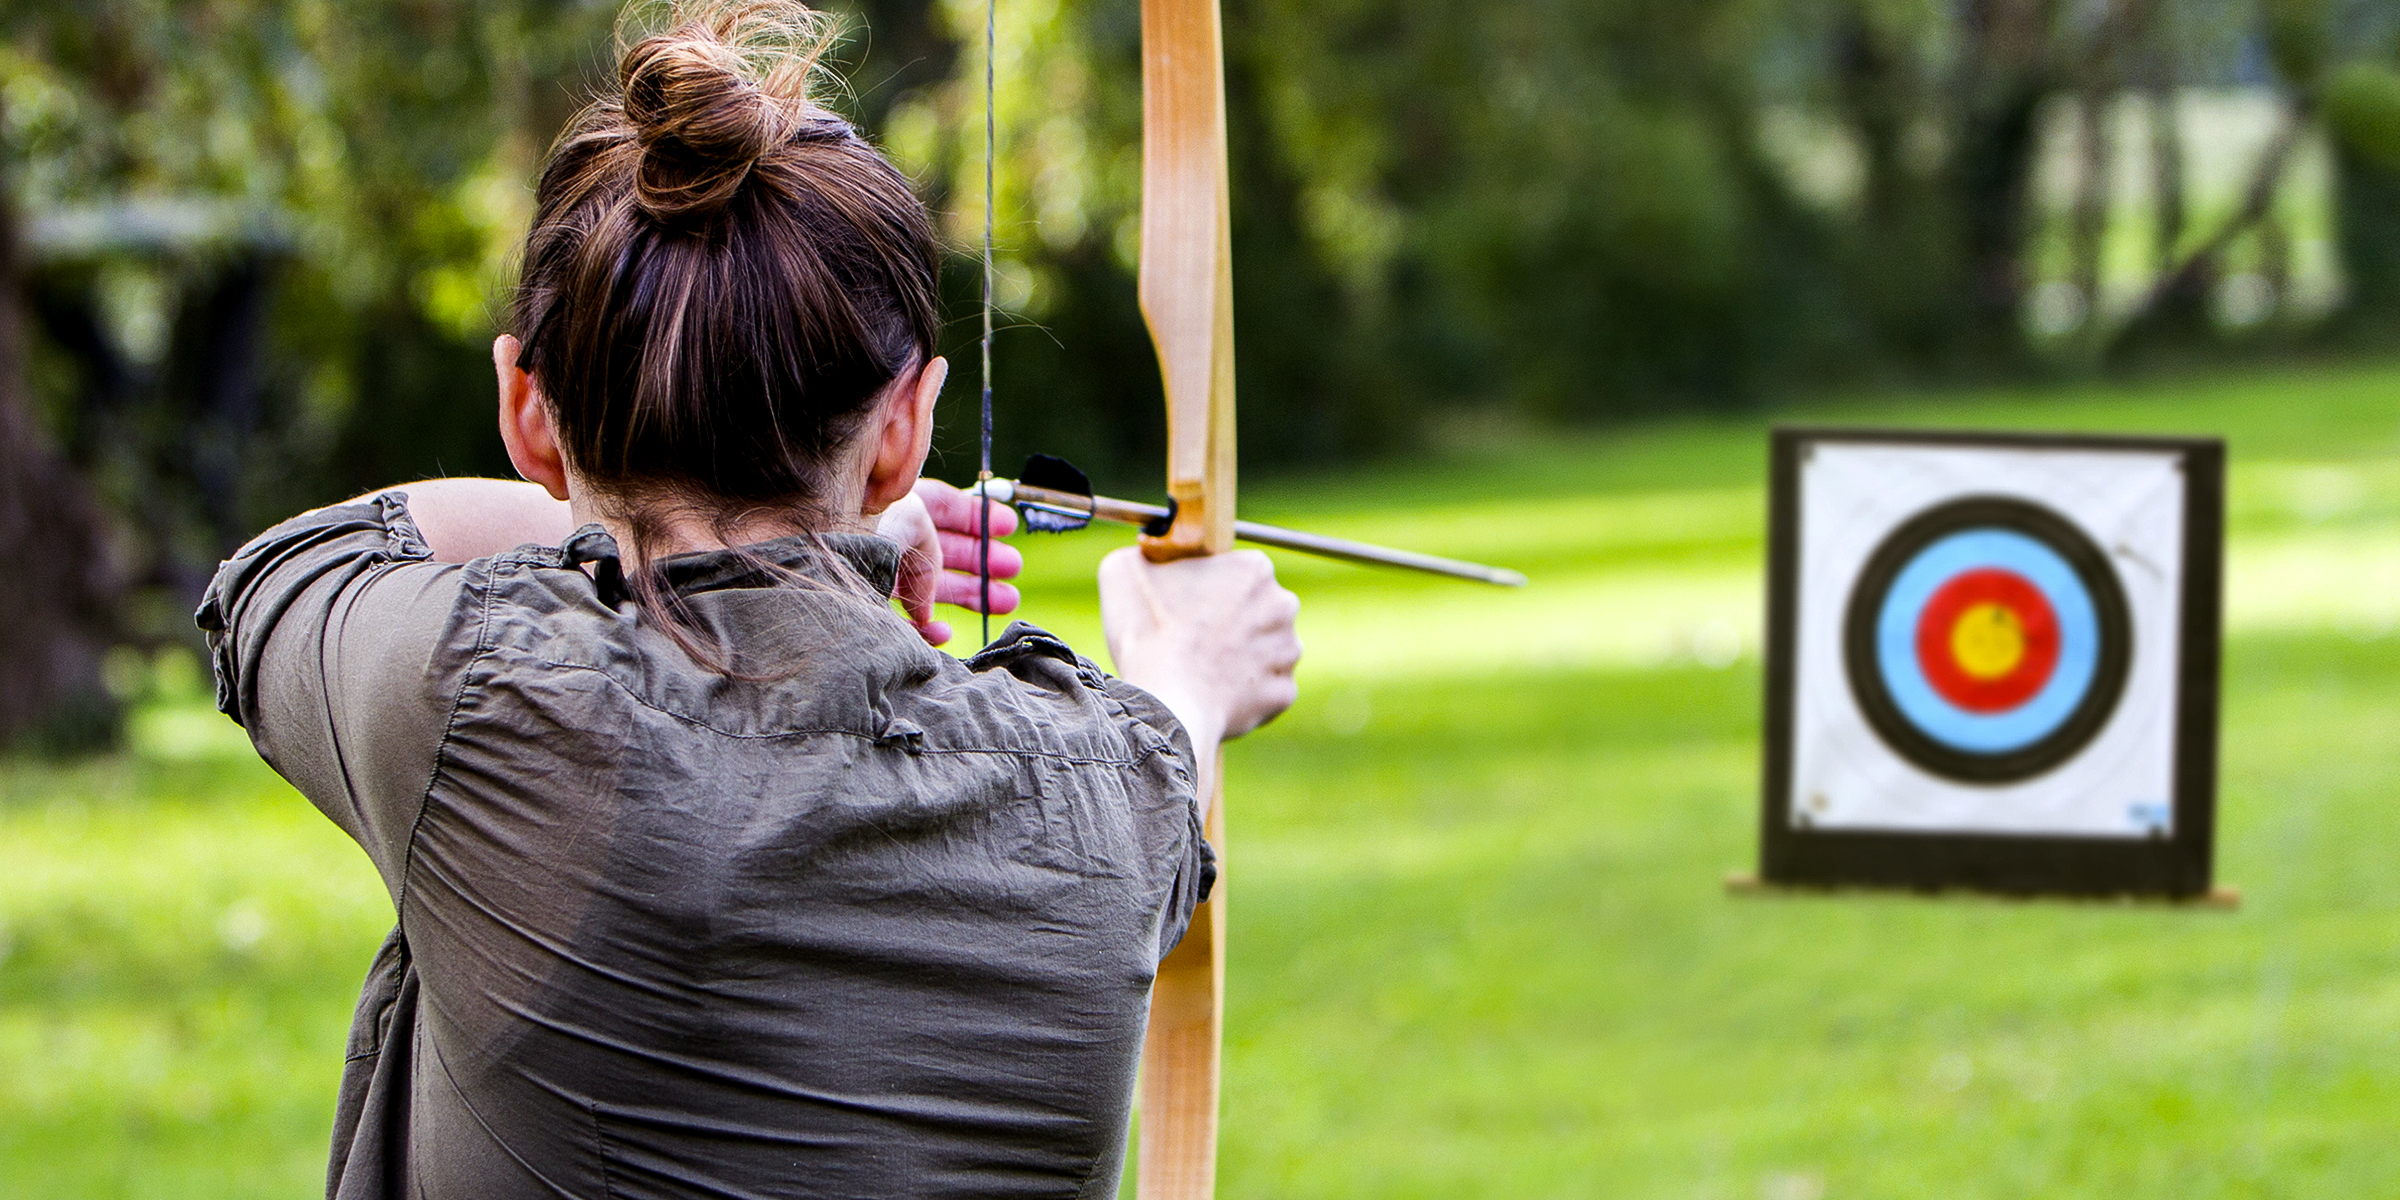 A woman engaged in archery | Source: Shutterstock